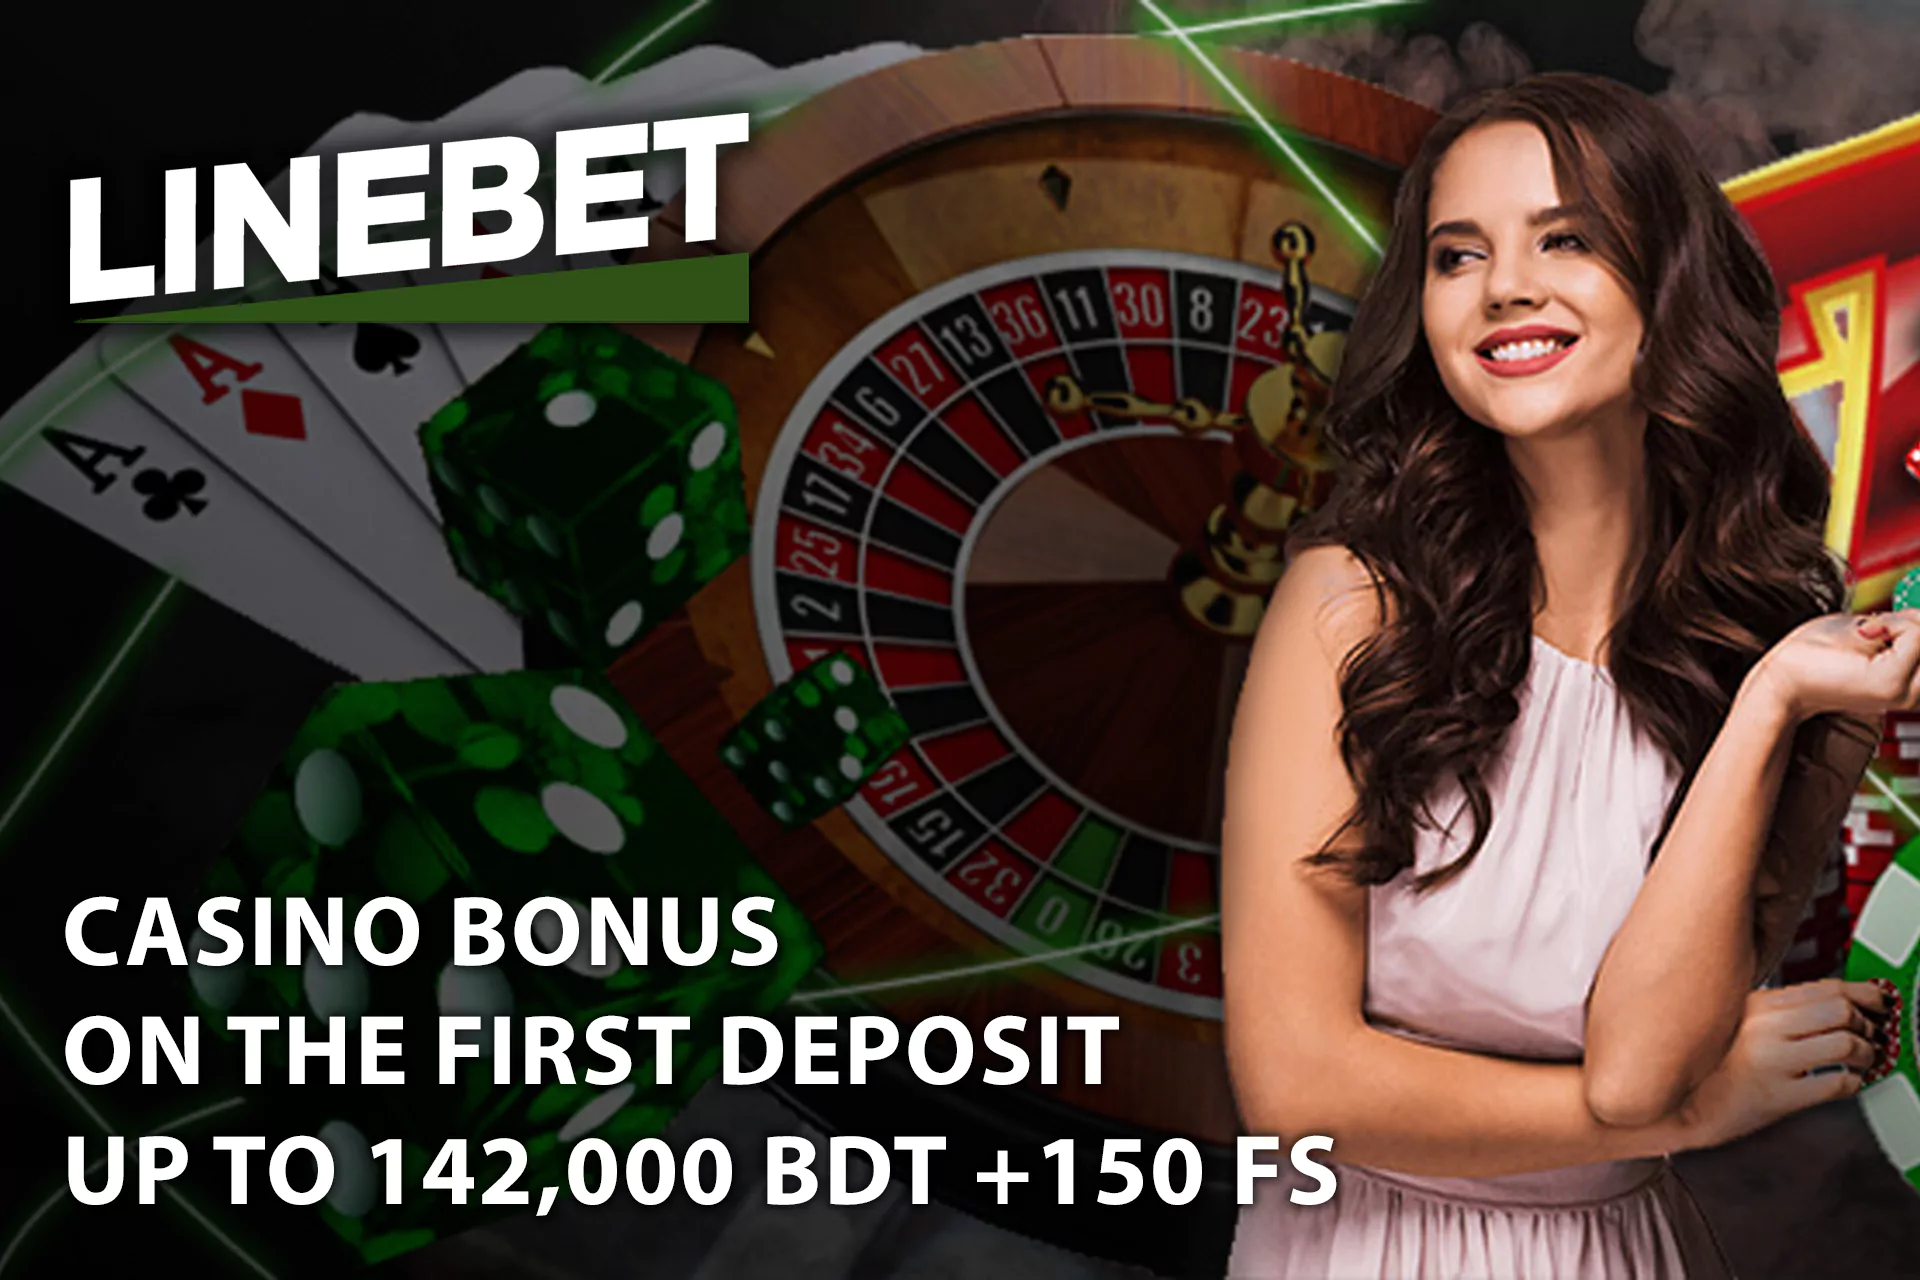 For new users, there is a welcome bonus on casino playings.